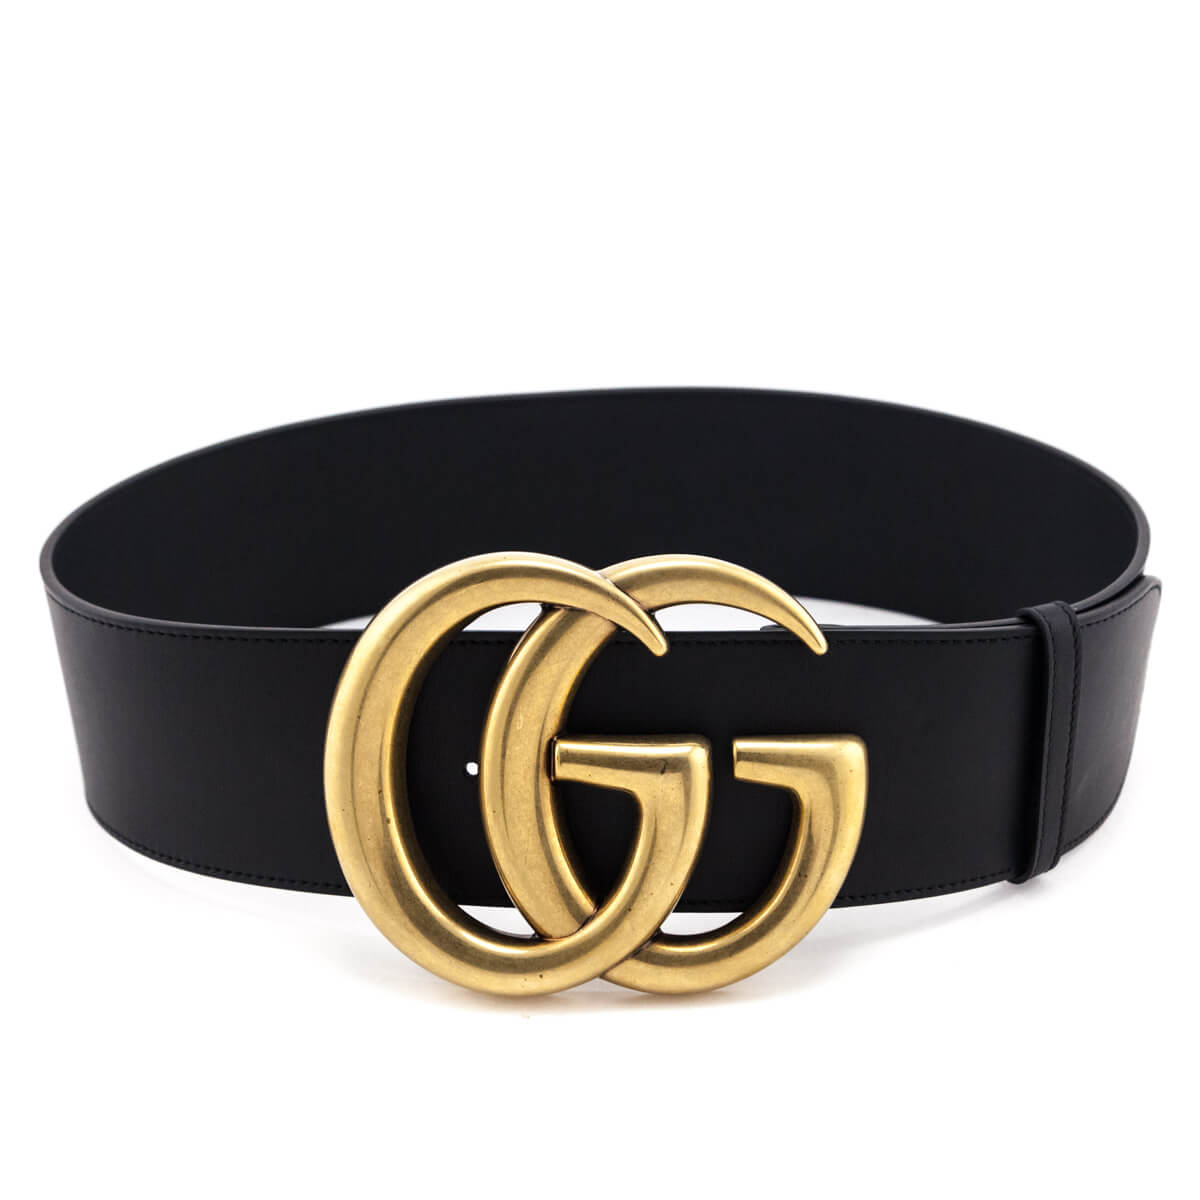 Gucci Black Extra Wide Double G Waist Belt Size M - Love that Bag etc - Preowned Authentic Designer Handbags & Preloved Fashions